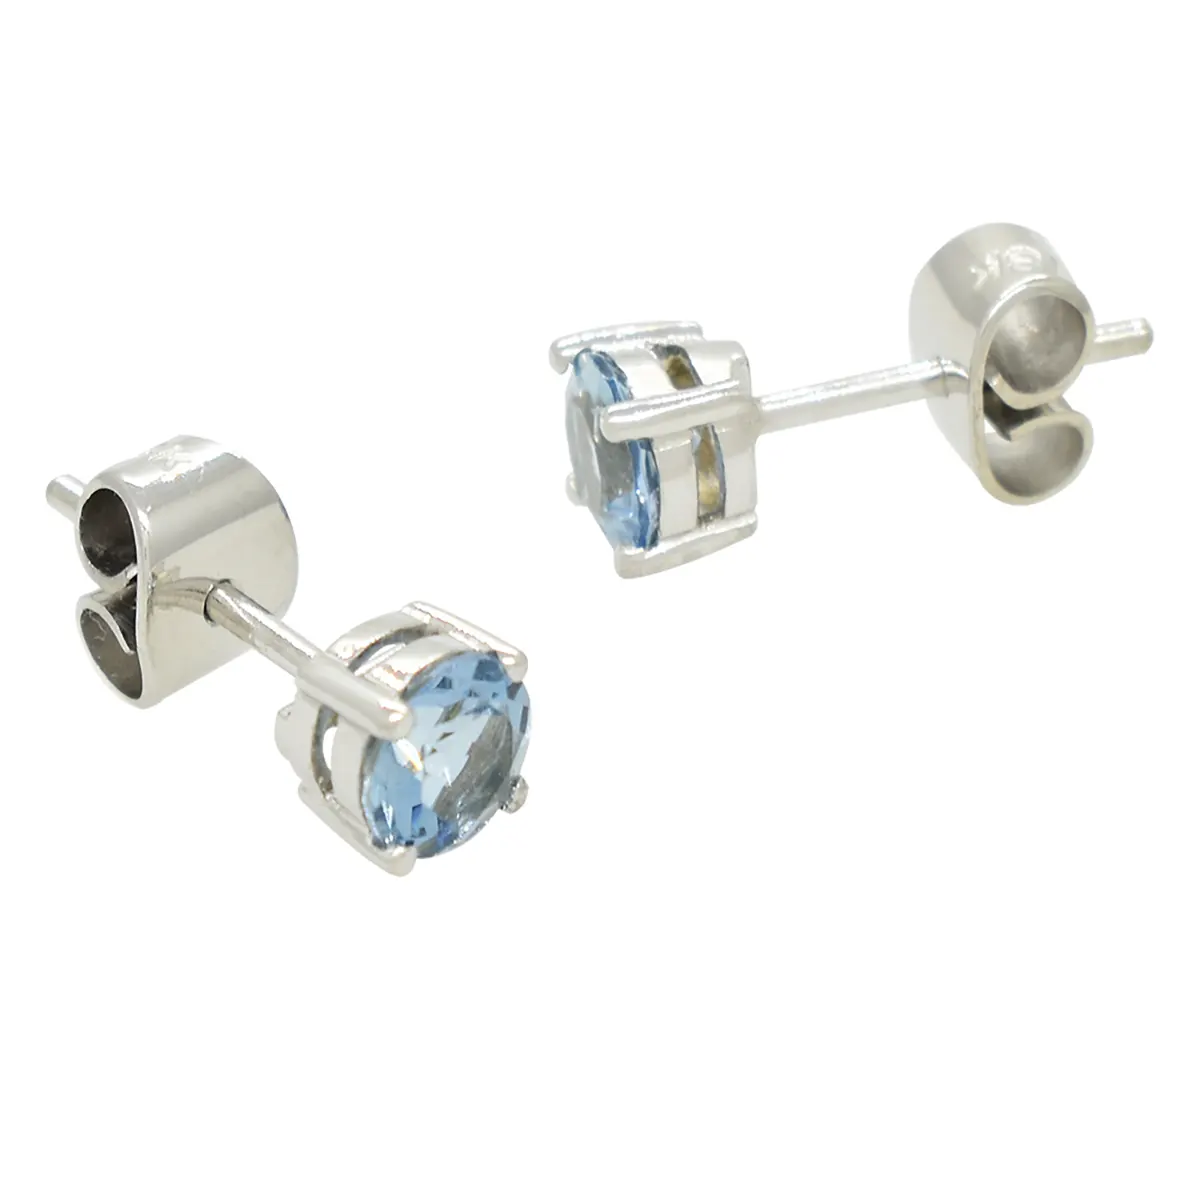 Classic Stud Earrings with Round Aquamarines in 18K White Gold